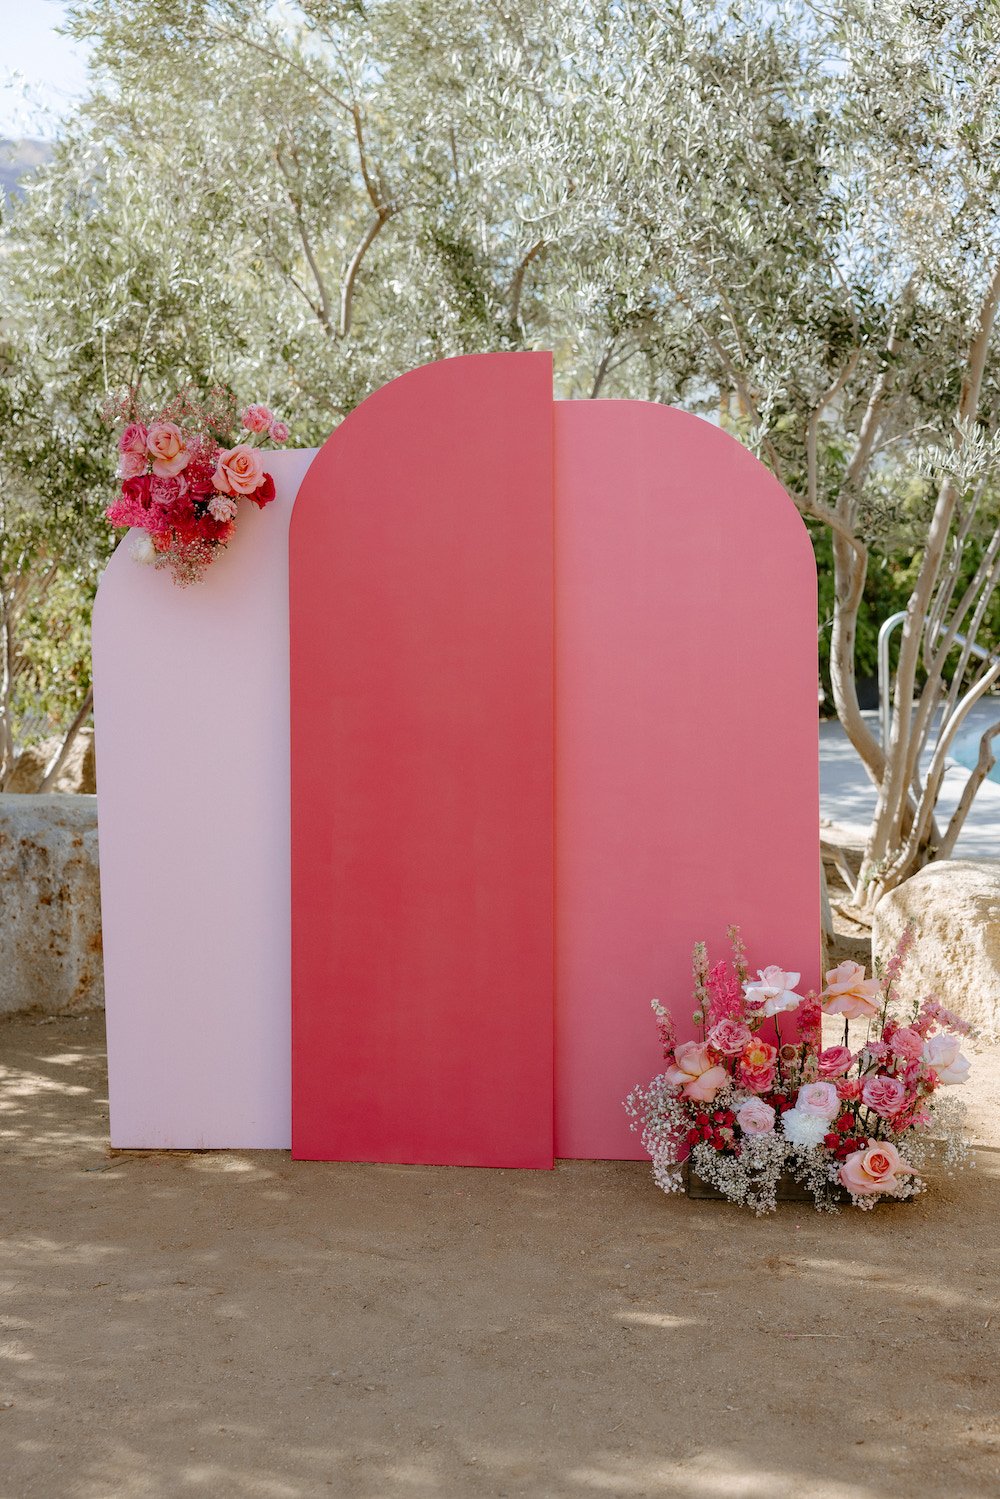 Hot pink modern wedding arch backdrop at The Ace Hotel in Palm Springs.